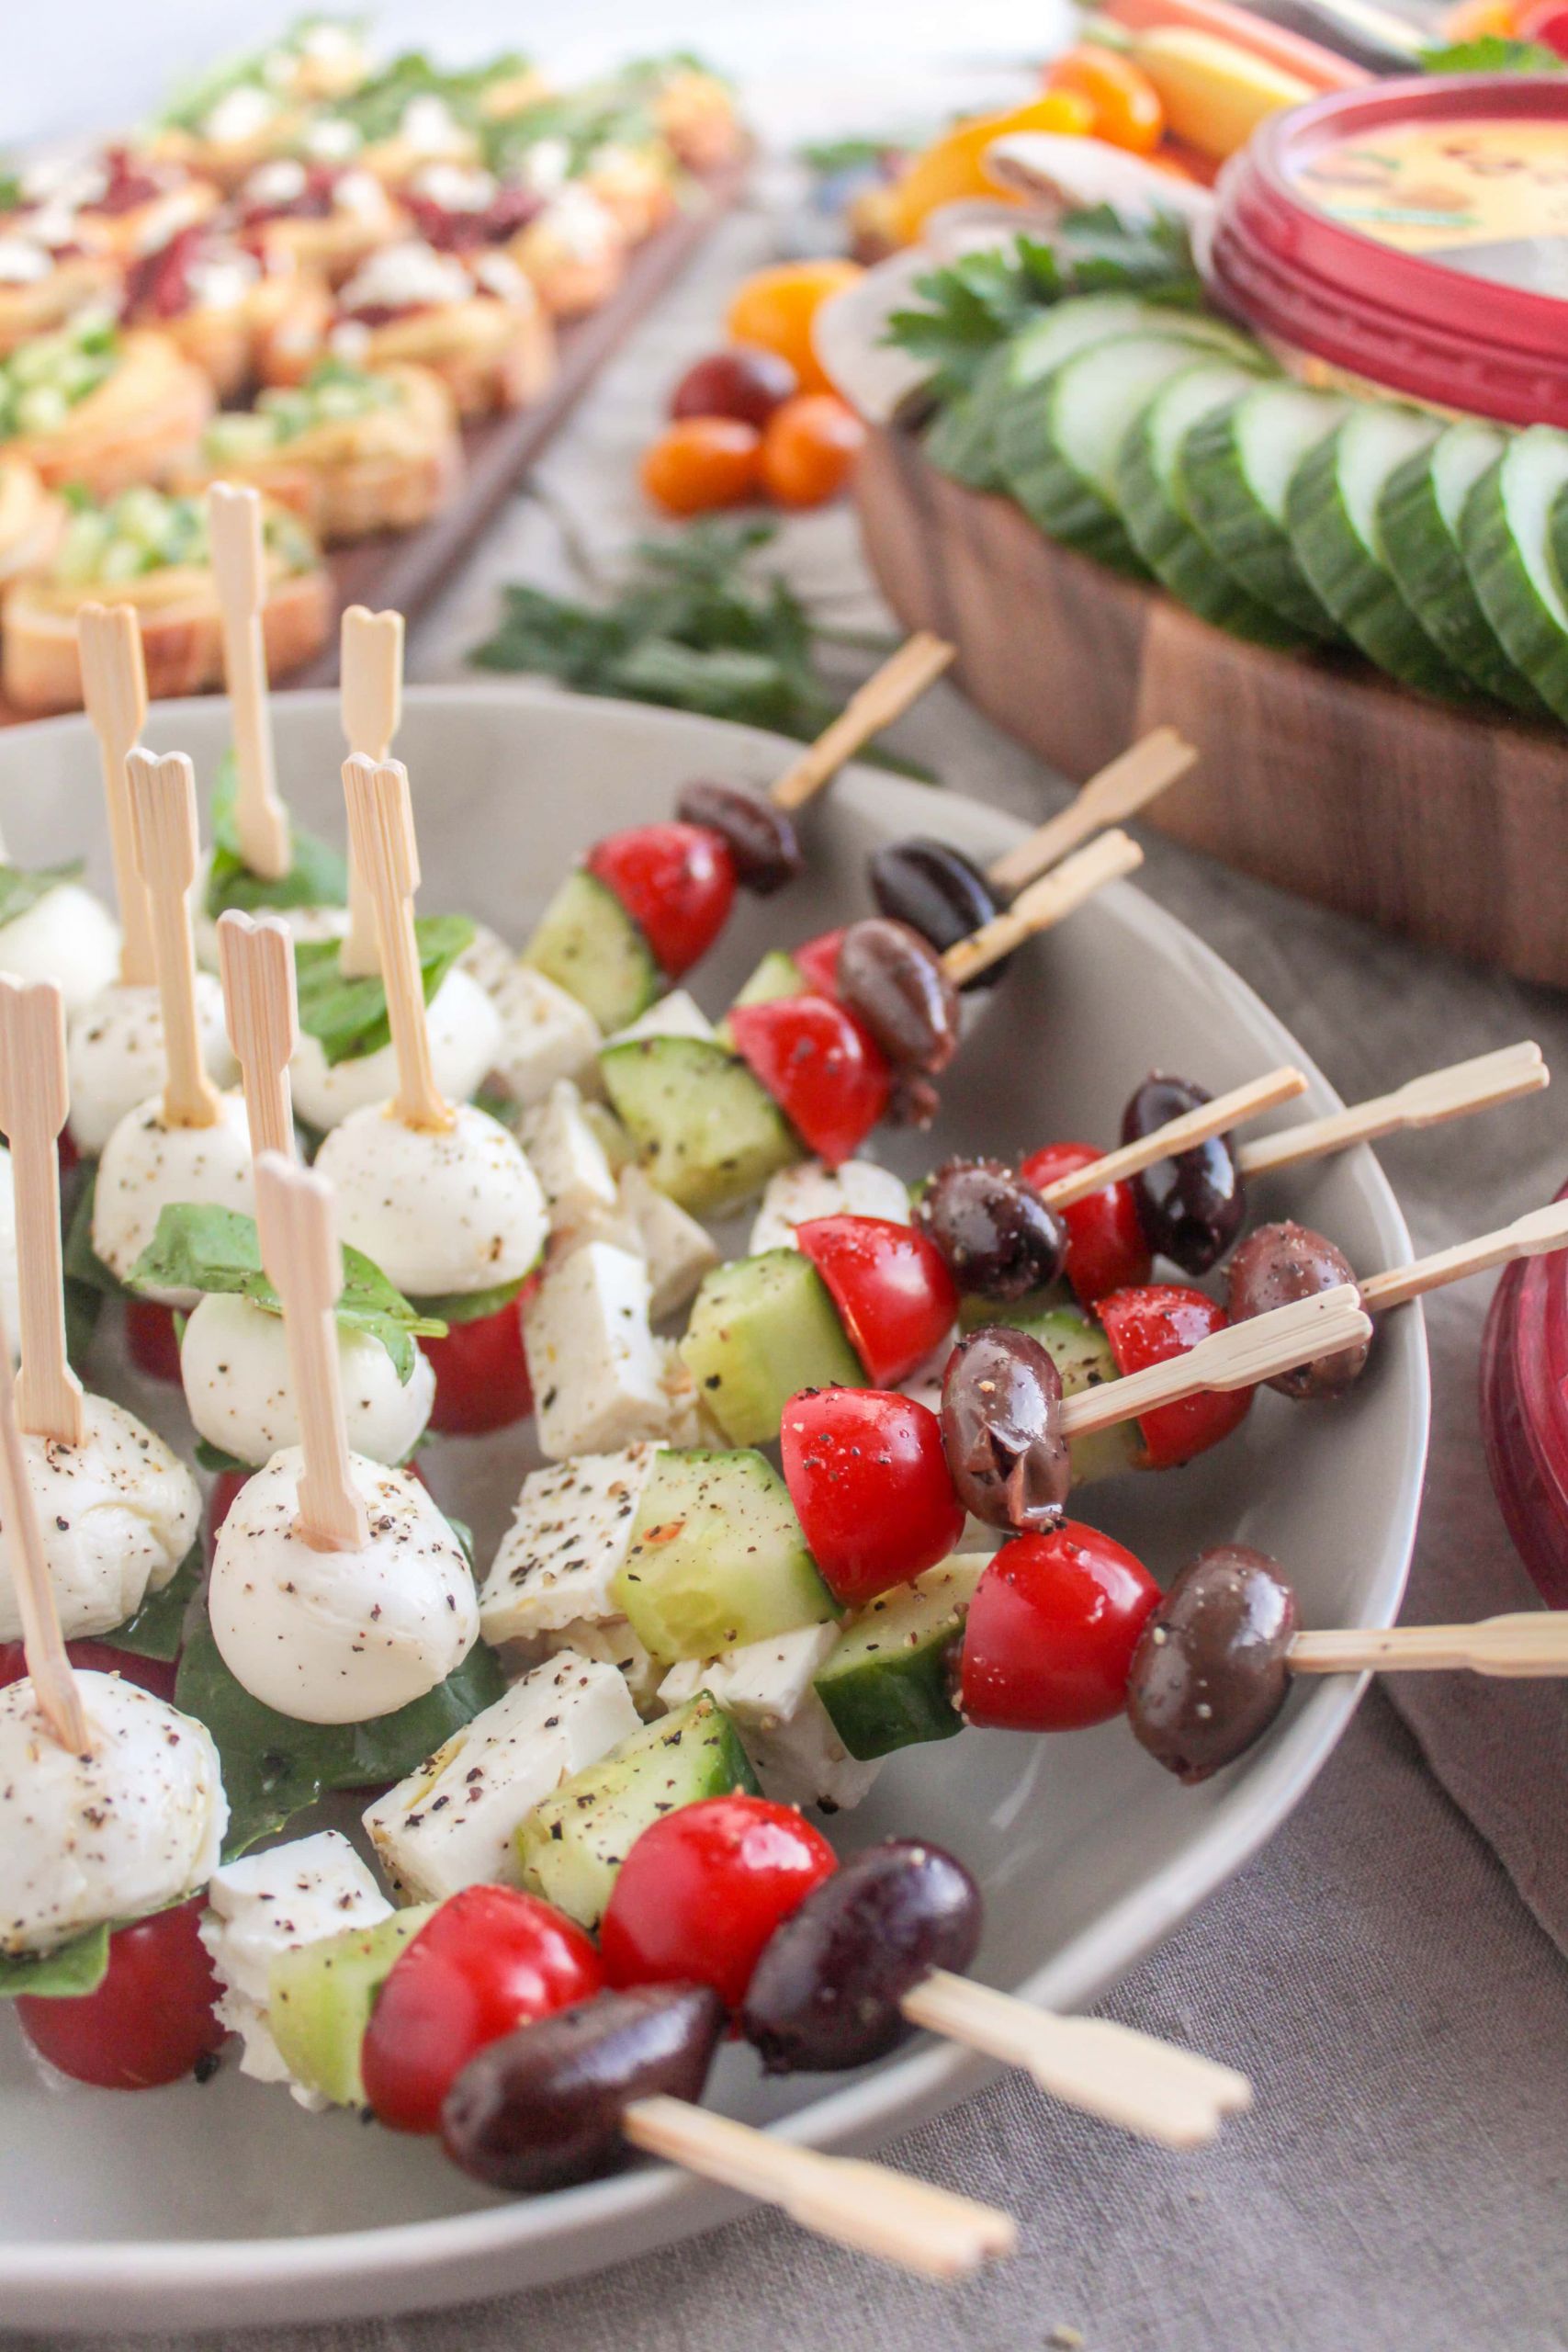 Superbowl Healthy Appetizers Lovely Healthy Throw to Her Super Bowl Snacks Ideas